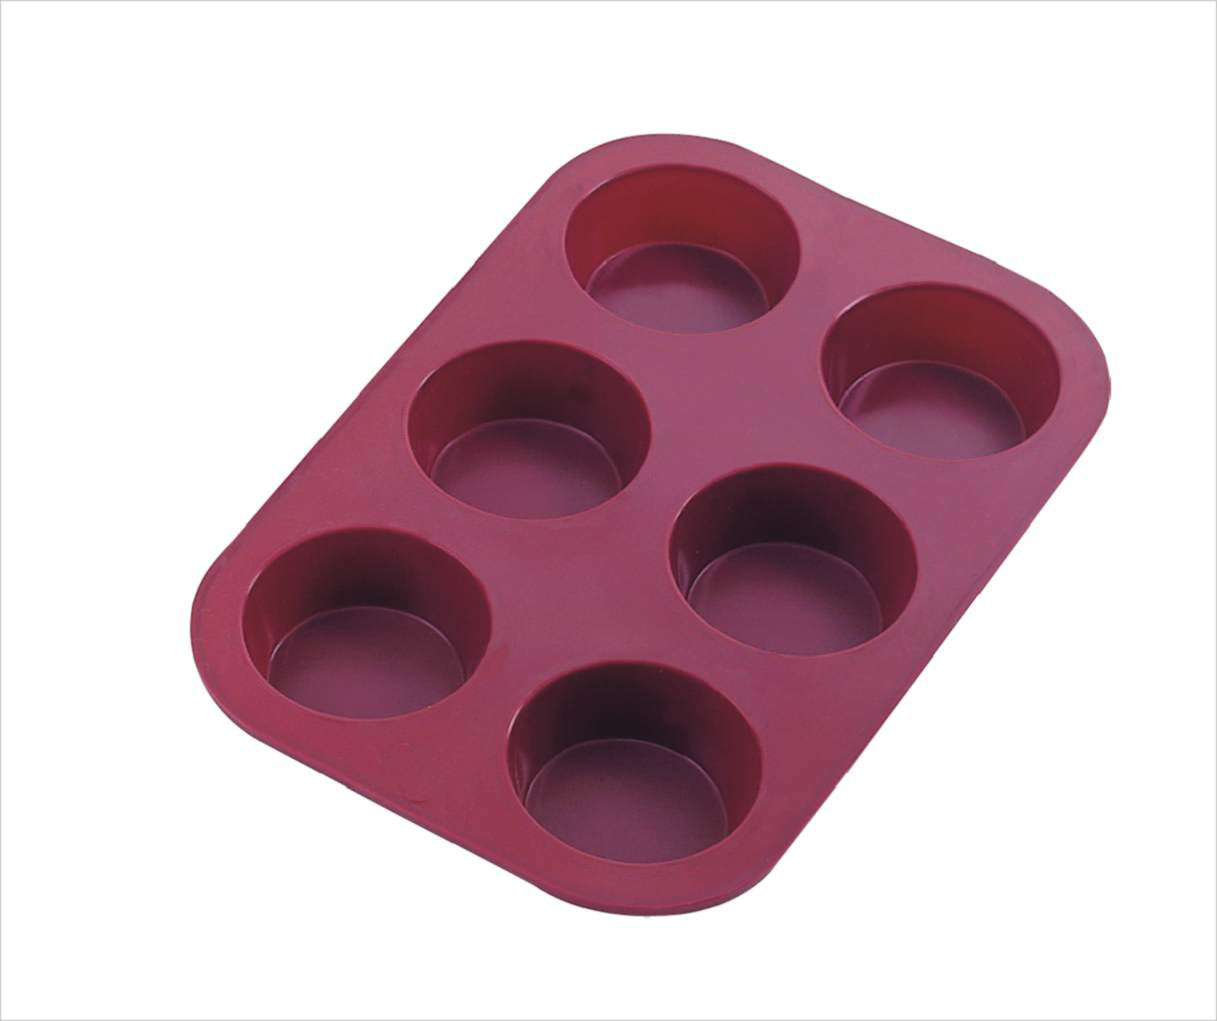  Silicone Bakeware - 6 Cup Muffin Pan (Plats de cuisson en silicone - 6 muffins)